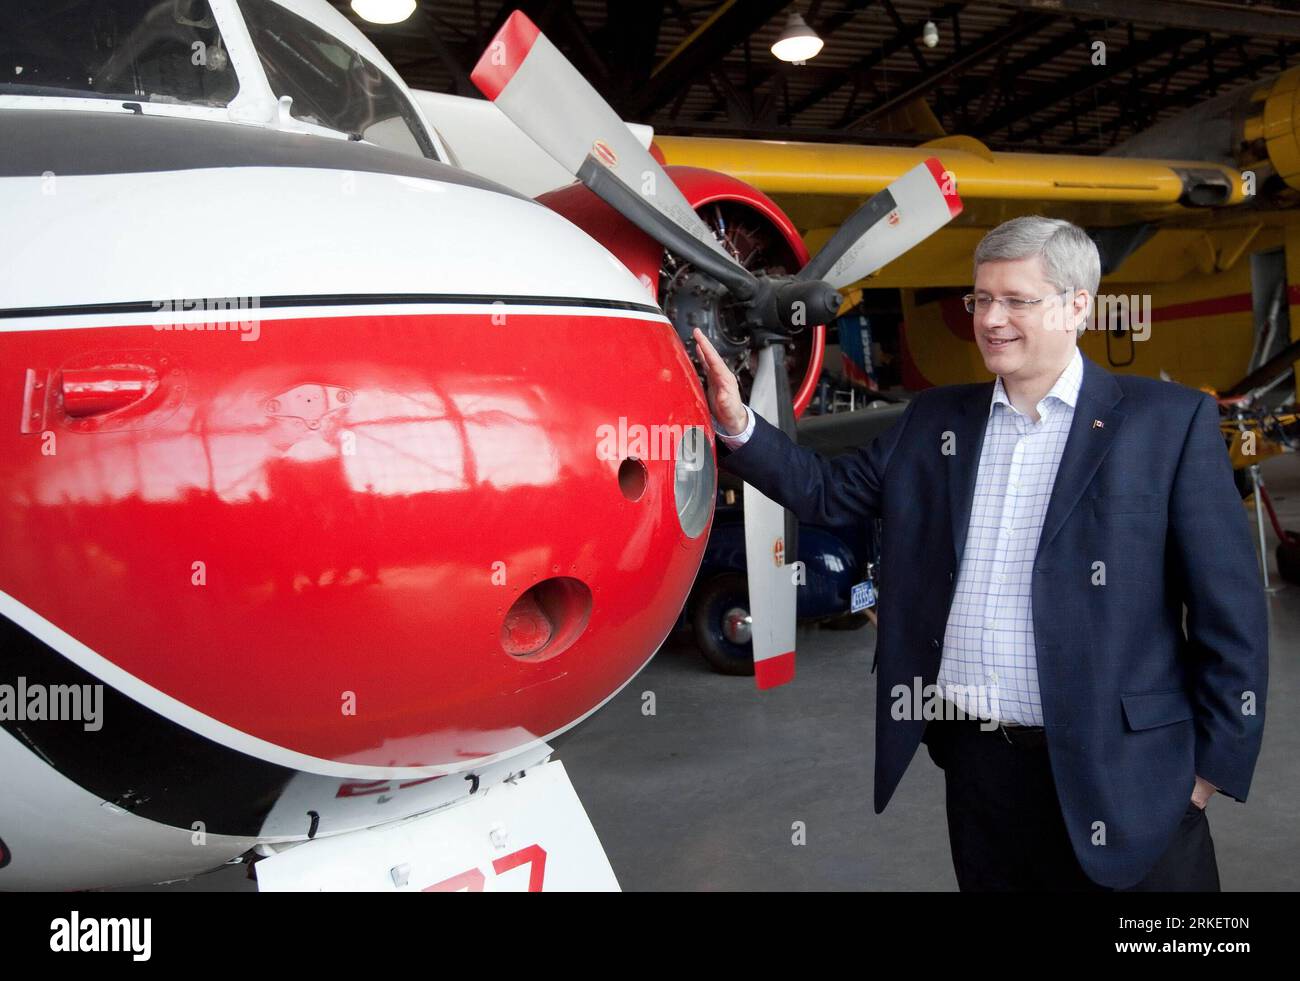 Bildnummer: 55287142  Datum: 25.04.2011  Copyright: imago/Xinhua (110425) -- OTTAWA, April 25, 2011 (Xinhua) -- Canadian Prime Minister and leader of Conservative Party Stephen Harper visits the Canadian Bushplane Heritage Centre in Sault Ste. Marie, Ontario, Canada, on April 25, 2011. Harper was on a campaign trip for the 41st federal election set on May 2. (Xinhua/Conservative Party of Canada) (zw) CANADA-ONTARIO-HARPER-CAMPAIGN PUBLICATIONxNOTxINxCHN People Politik Wahl Präsidentschaftswahlen Wahlen Wahlkampf Kanada kbdig xdp 2011 quer premiumd o0 Flugzeug, Museum, Flugzeugmuseum    Bildnum Stock Photo